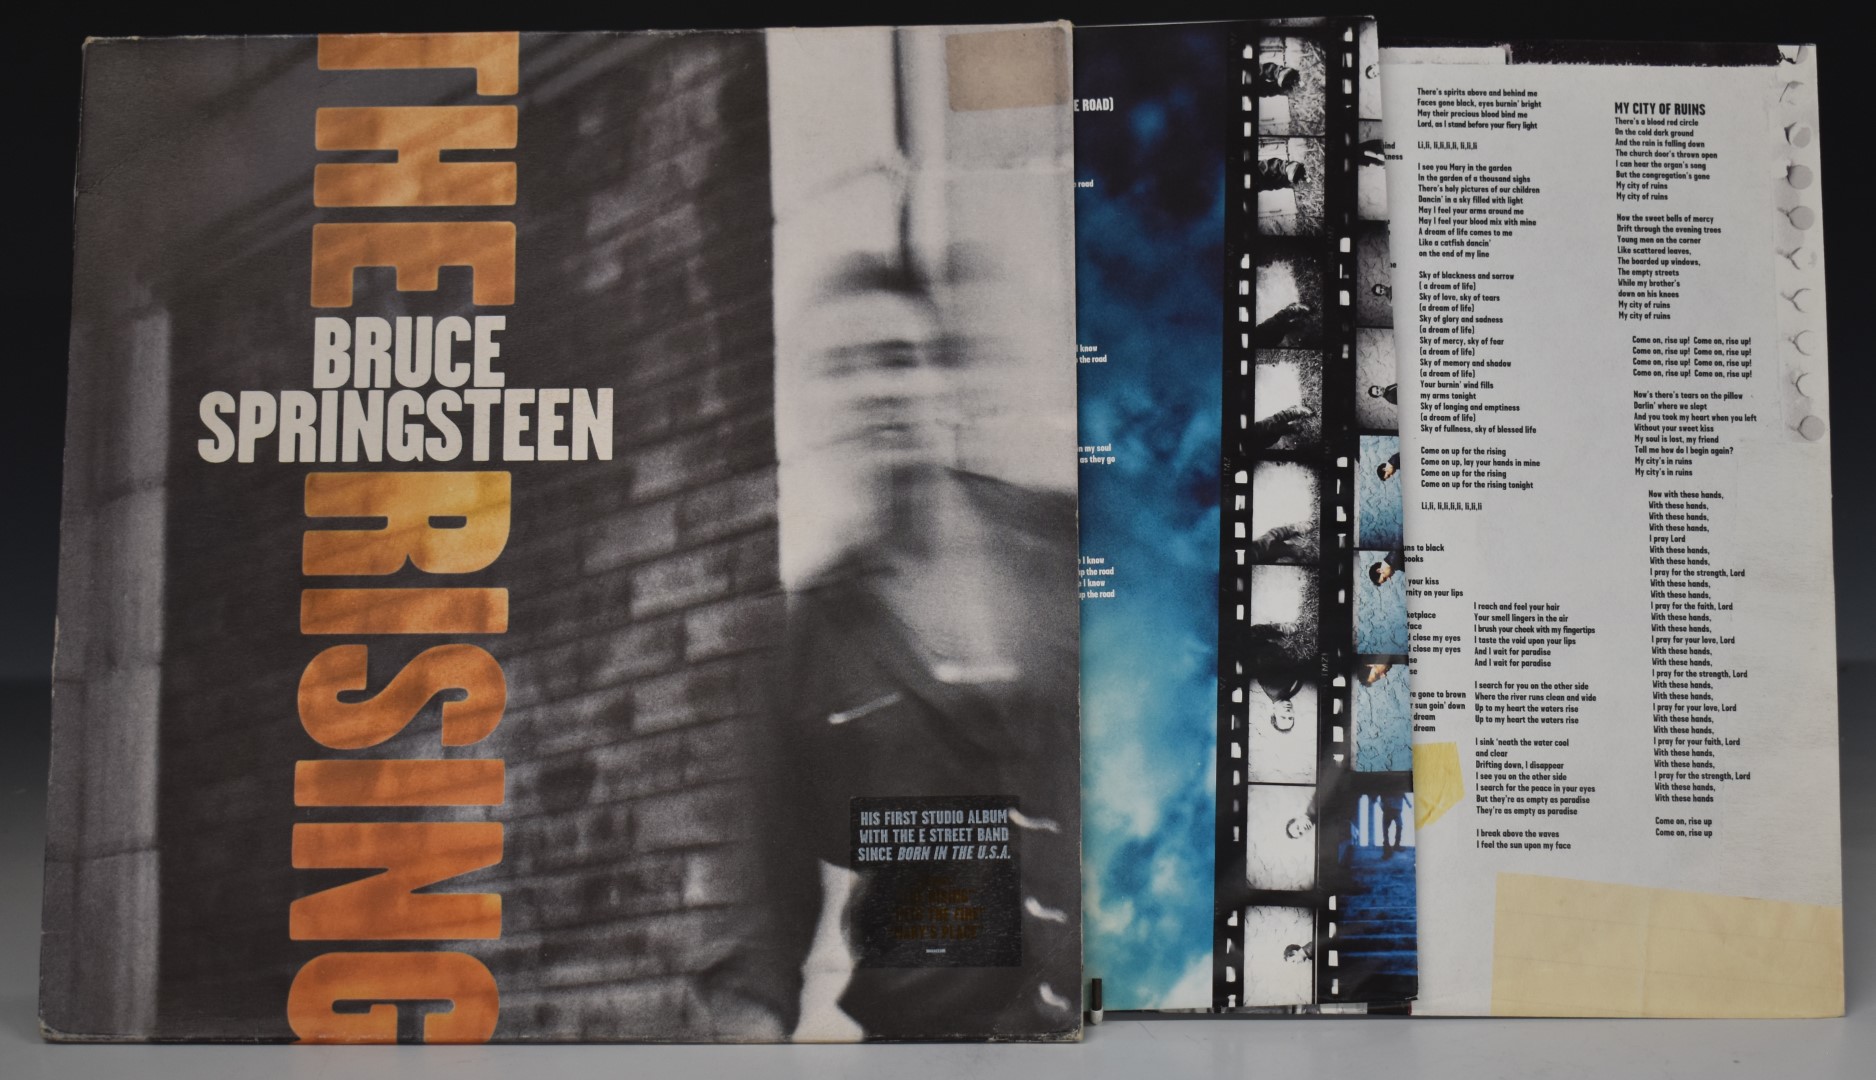 Bruce Springsteen - The Rising (COL 5080001), records appear EX, inners VG with wear to cover and - Image 2 of 3